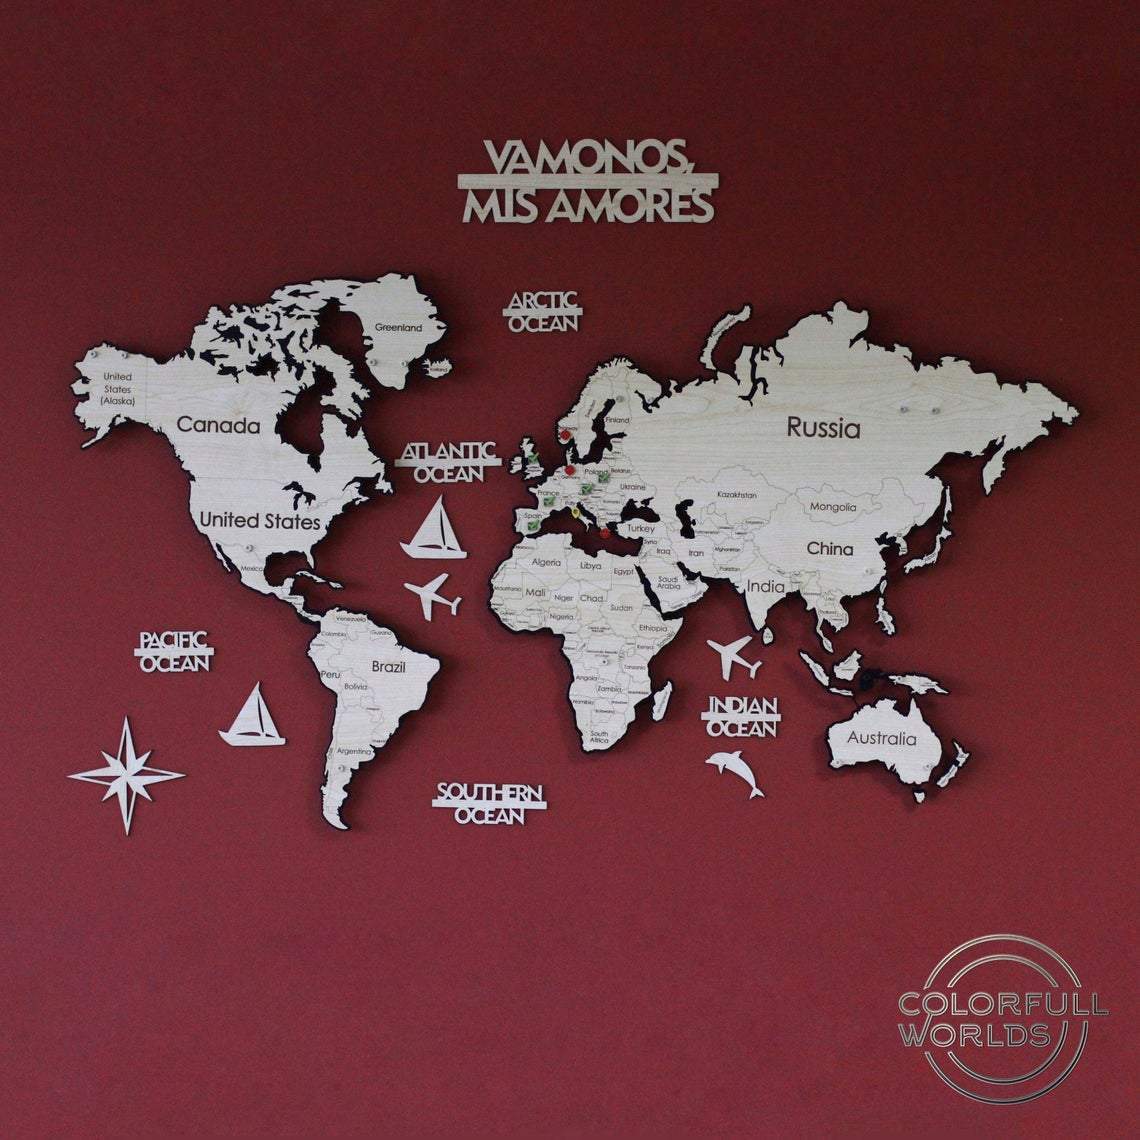 Metal World Map 3D - Decorative Metal 2 Size by Woody Signs Co. - Handmade Crafted Unique Wooden Creative